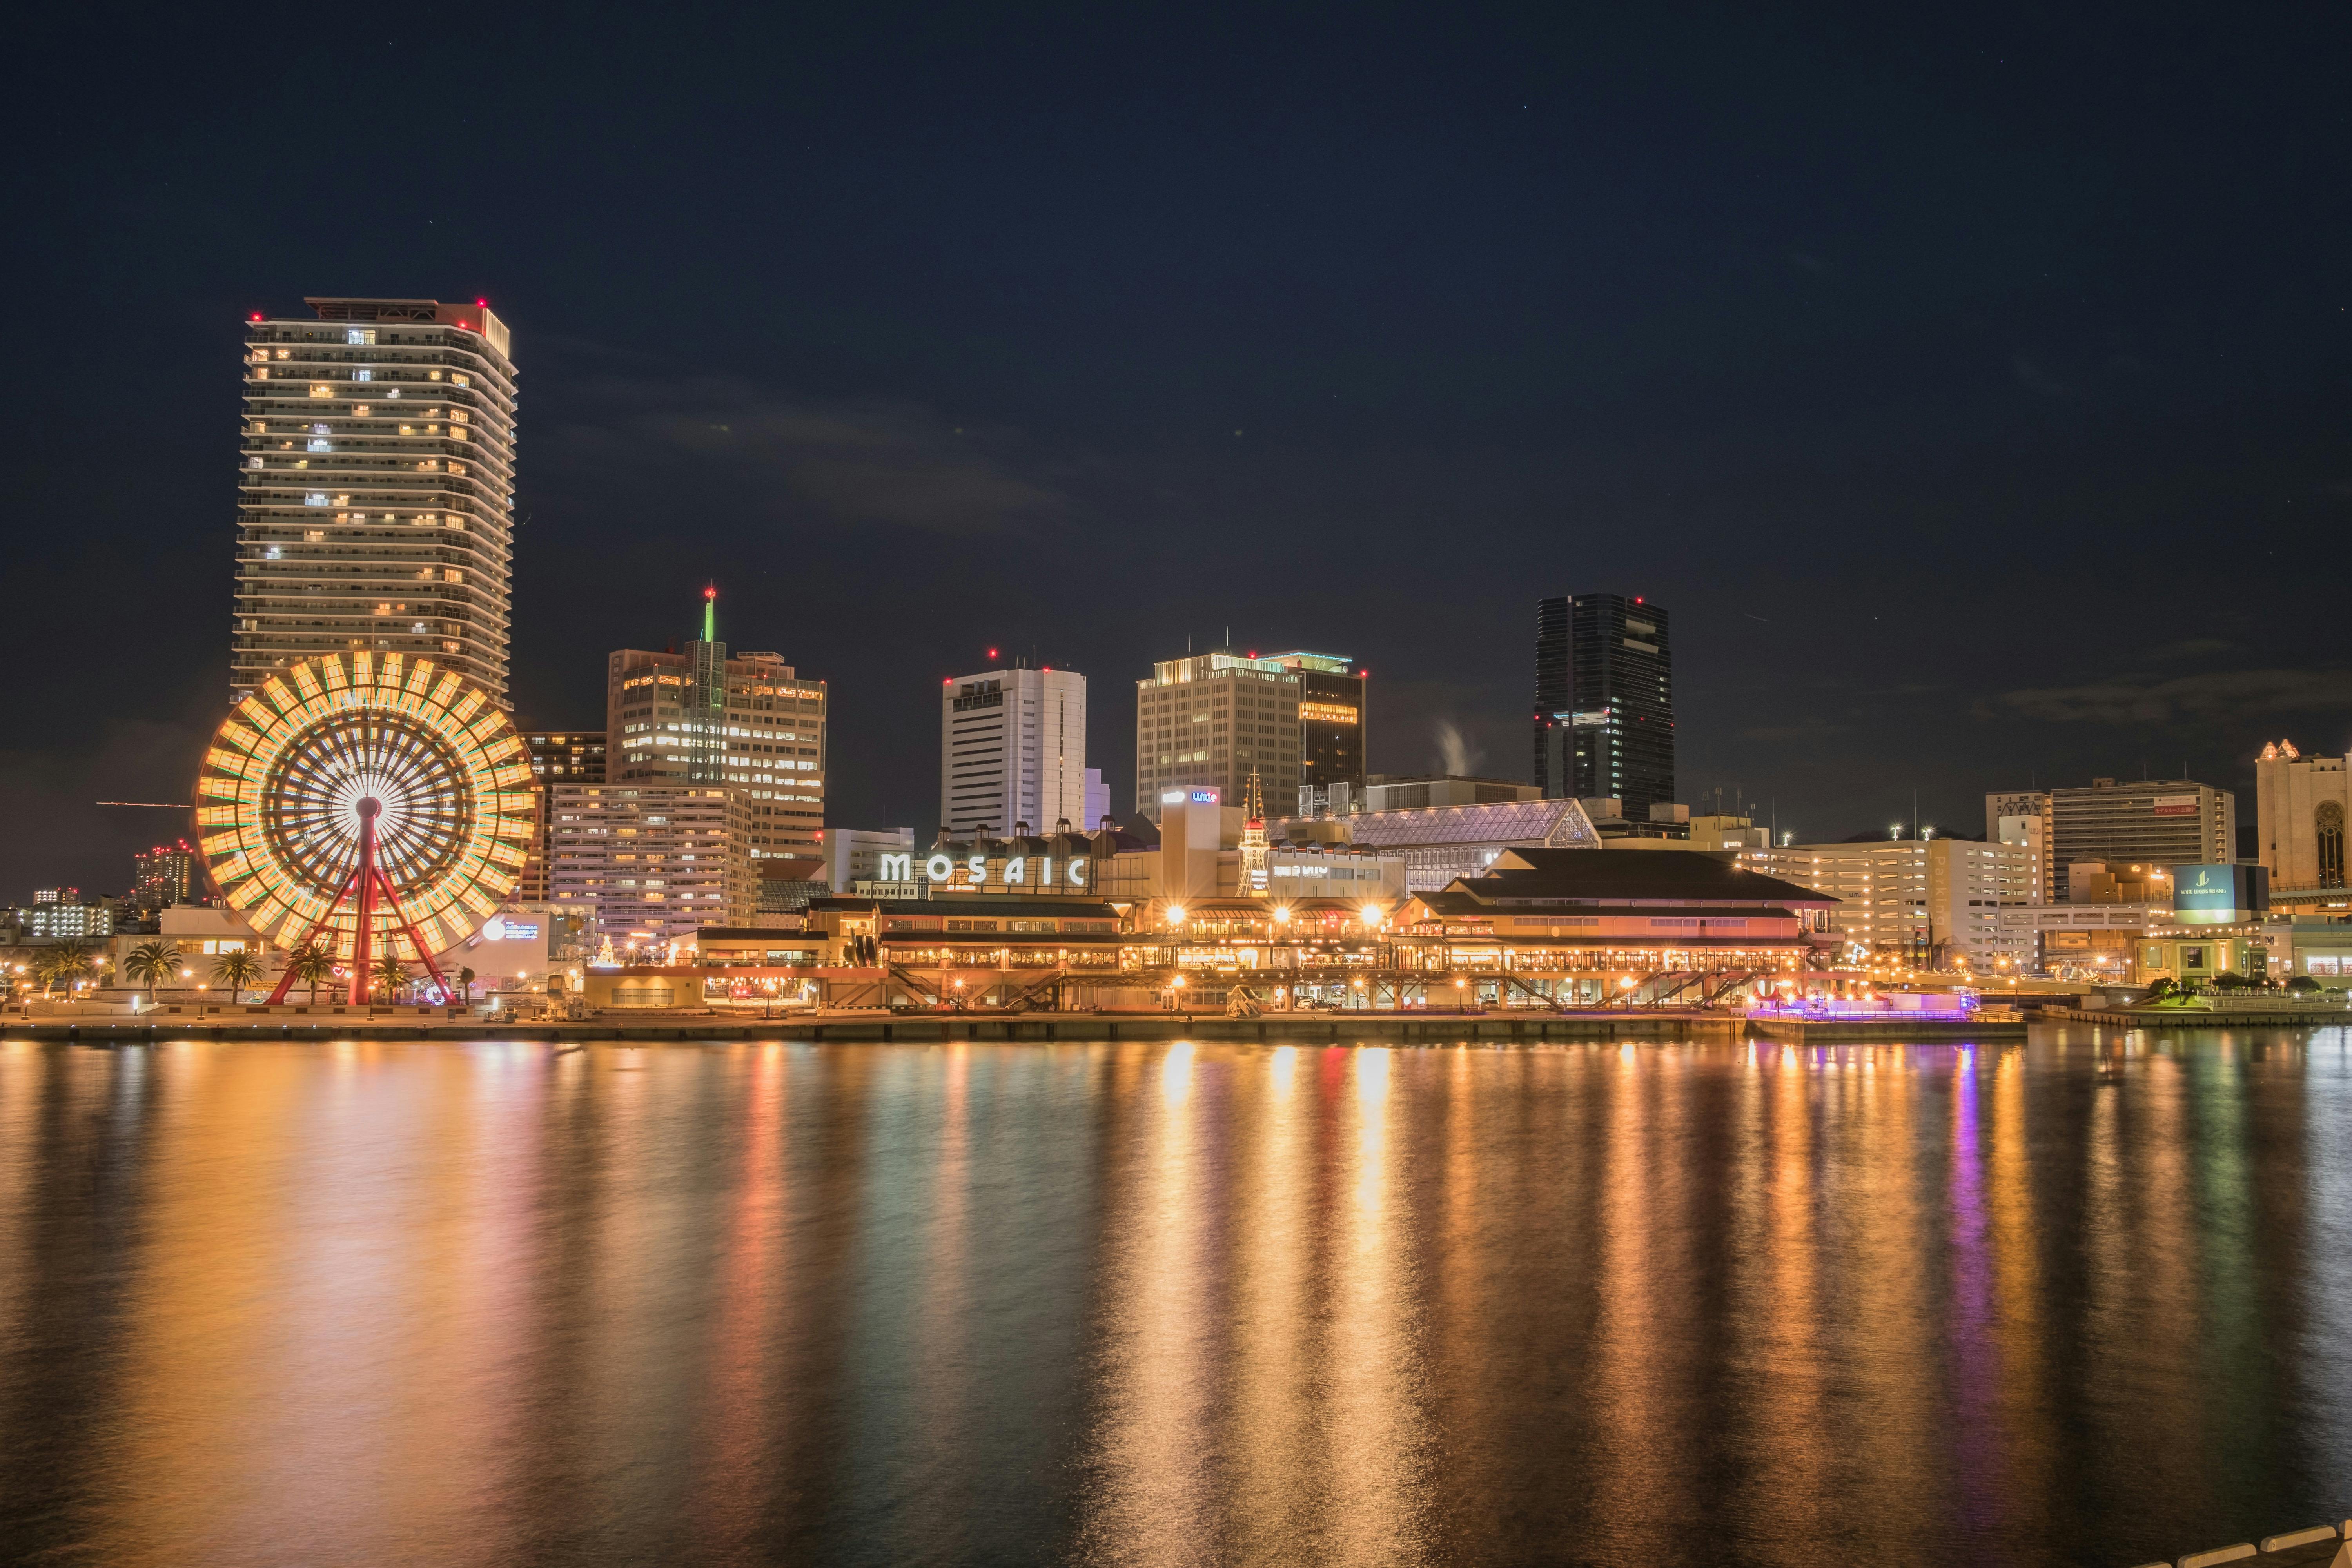 Experience the mesmerizing lights of Japan's cityscape reflected in the tranquil nighttime waters.